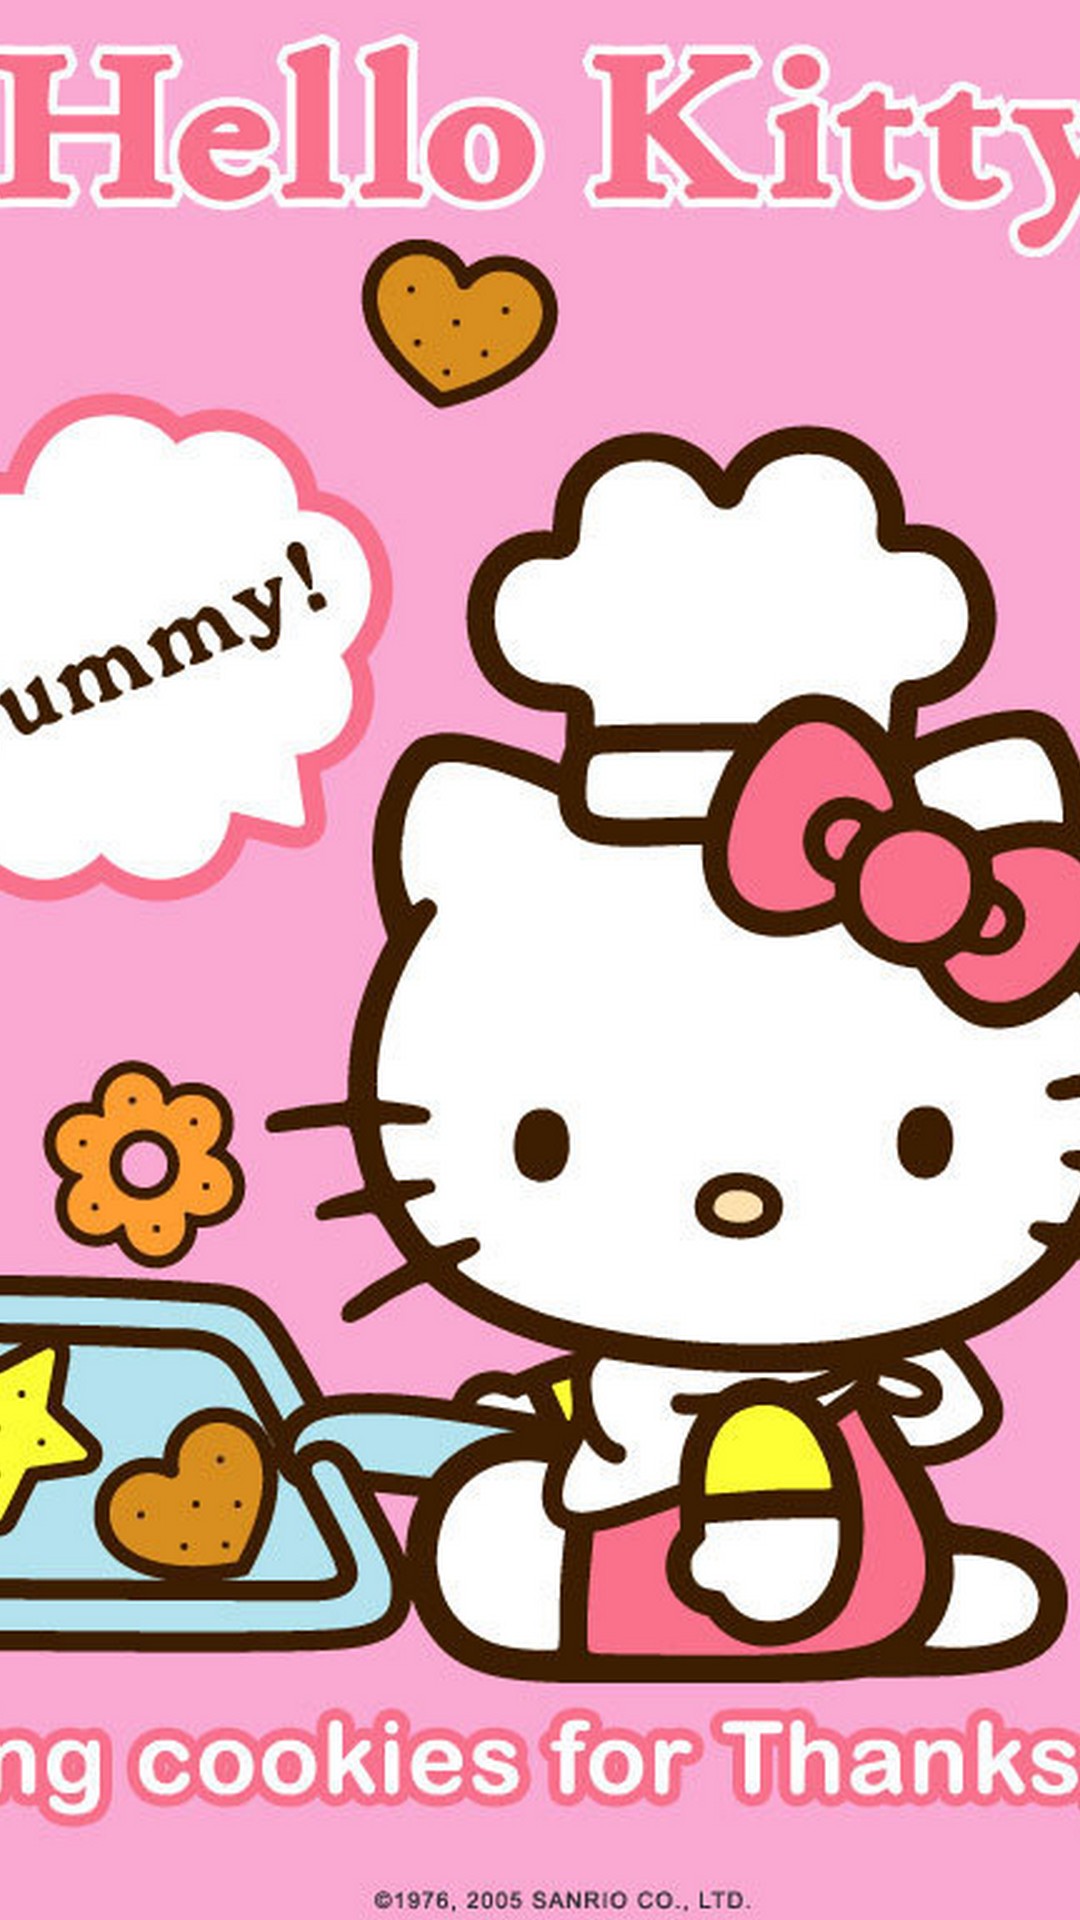 iPhone Wallpaper Hello Kitty Pictures with resolution 1080X1920 pixel. You can make this wallpaper for your iPhone 5, 6, 7, 8, X backgrounds, Mobile Screensaver, or iPad Lock Screen